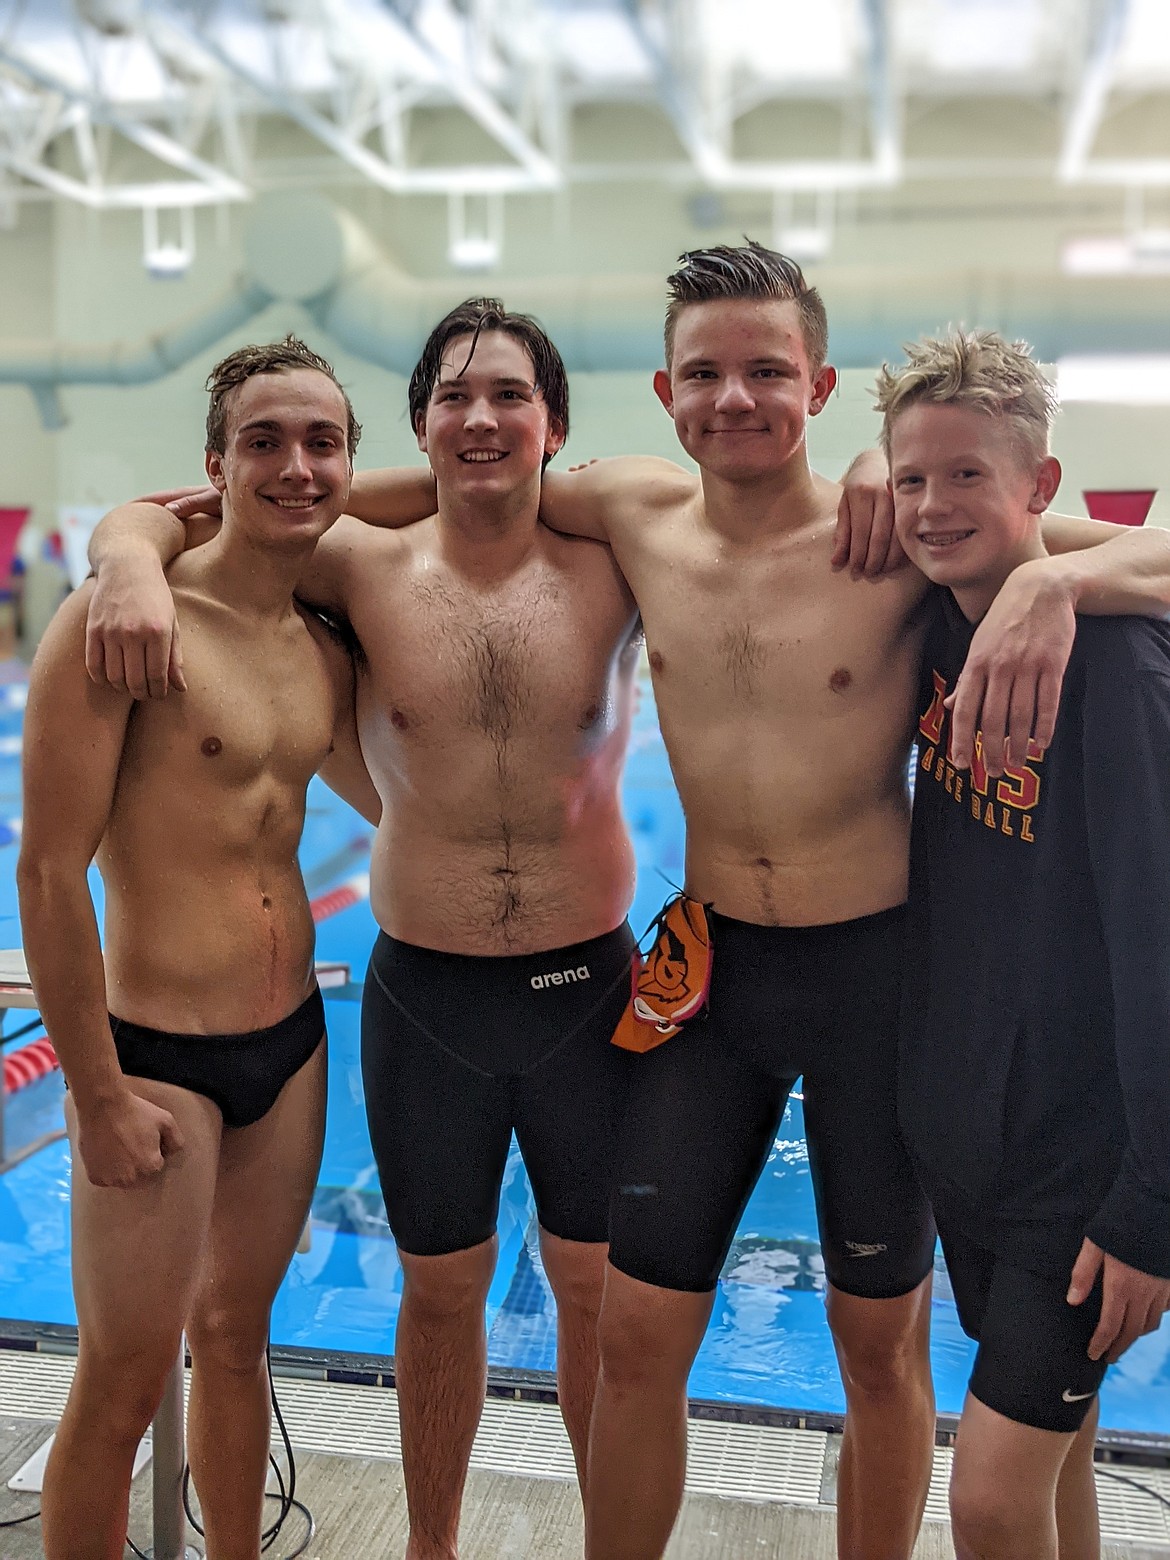 Courtesy photo
Post Falls High broke school records in the 200-yard individual medley relay and the 200 freestyle relay at the 5A North Idaho district swim meet on Saturday at the Kroc Center in Coeur d'Alene. From left are seniors Dylan Rieben, Charles Daniel “CD” Sharples and Ryder Koch; and junior Jonas Malone, who swam on both relays. State is this Friday and Saturday in Boise.